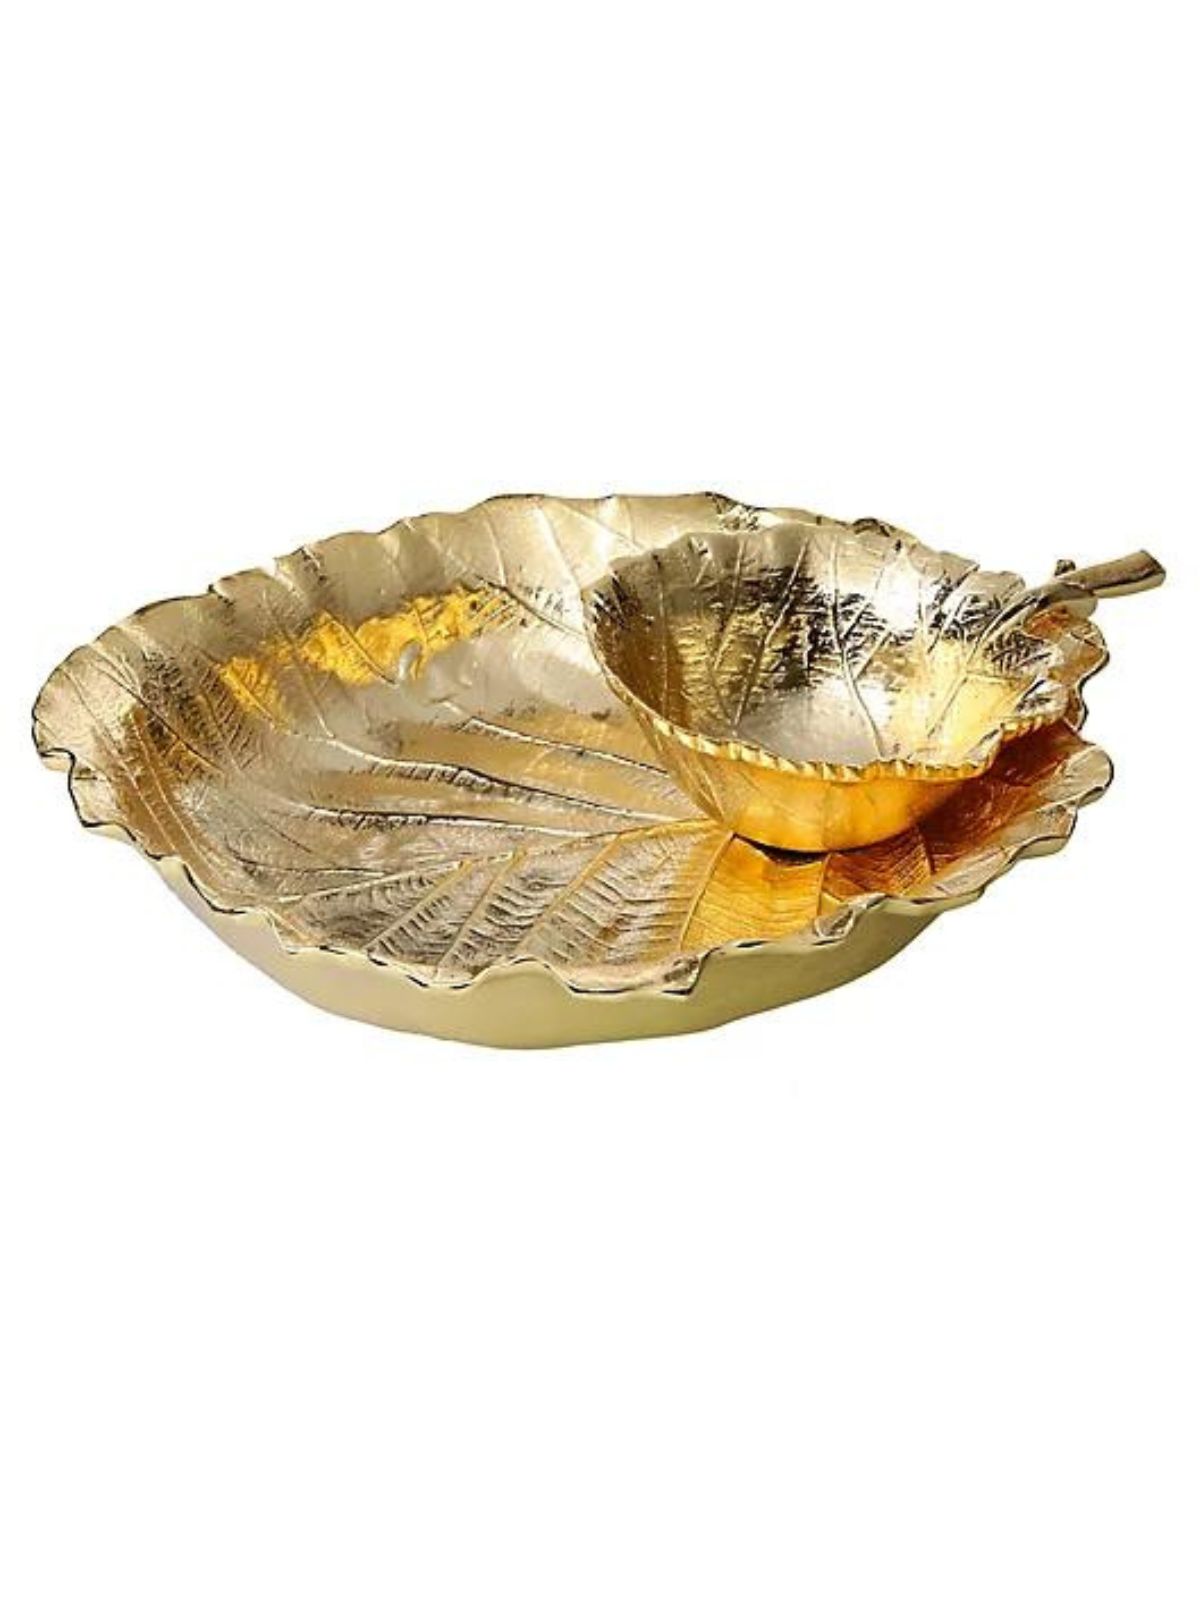 Gold Stainless Steel Leaf Shaped Chip and Dip Bowl Sold by KYA Home Decor.